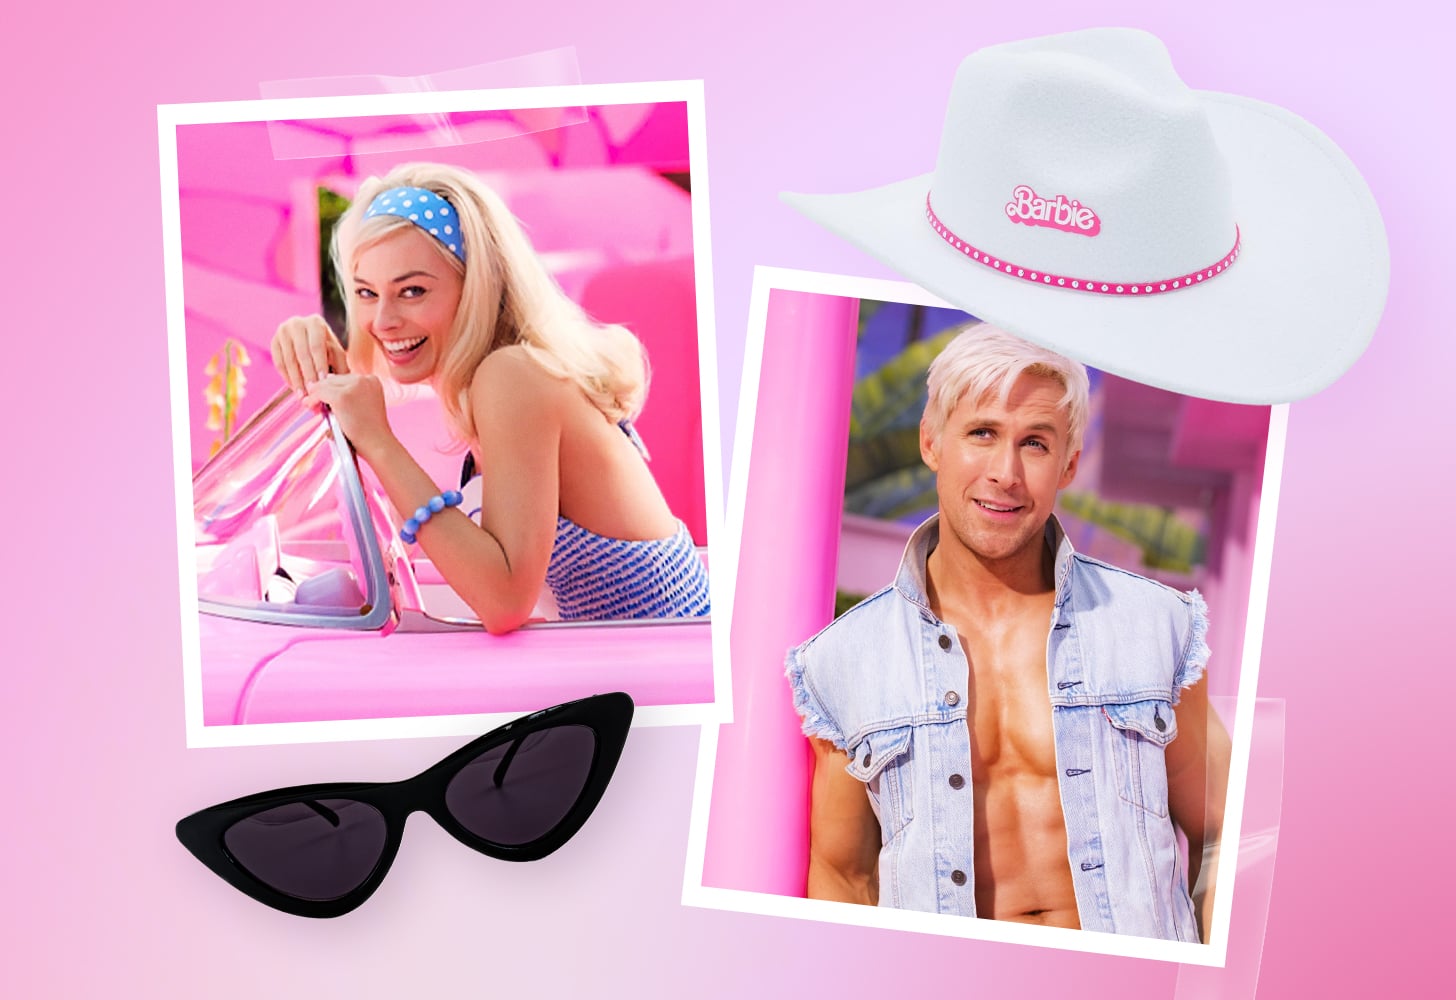 11 Best Barbie and Ken Costume Ideas Inspired by the Barbie Movie